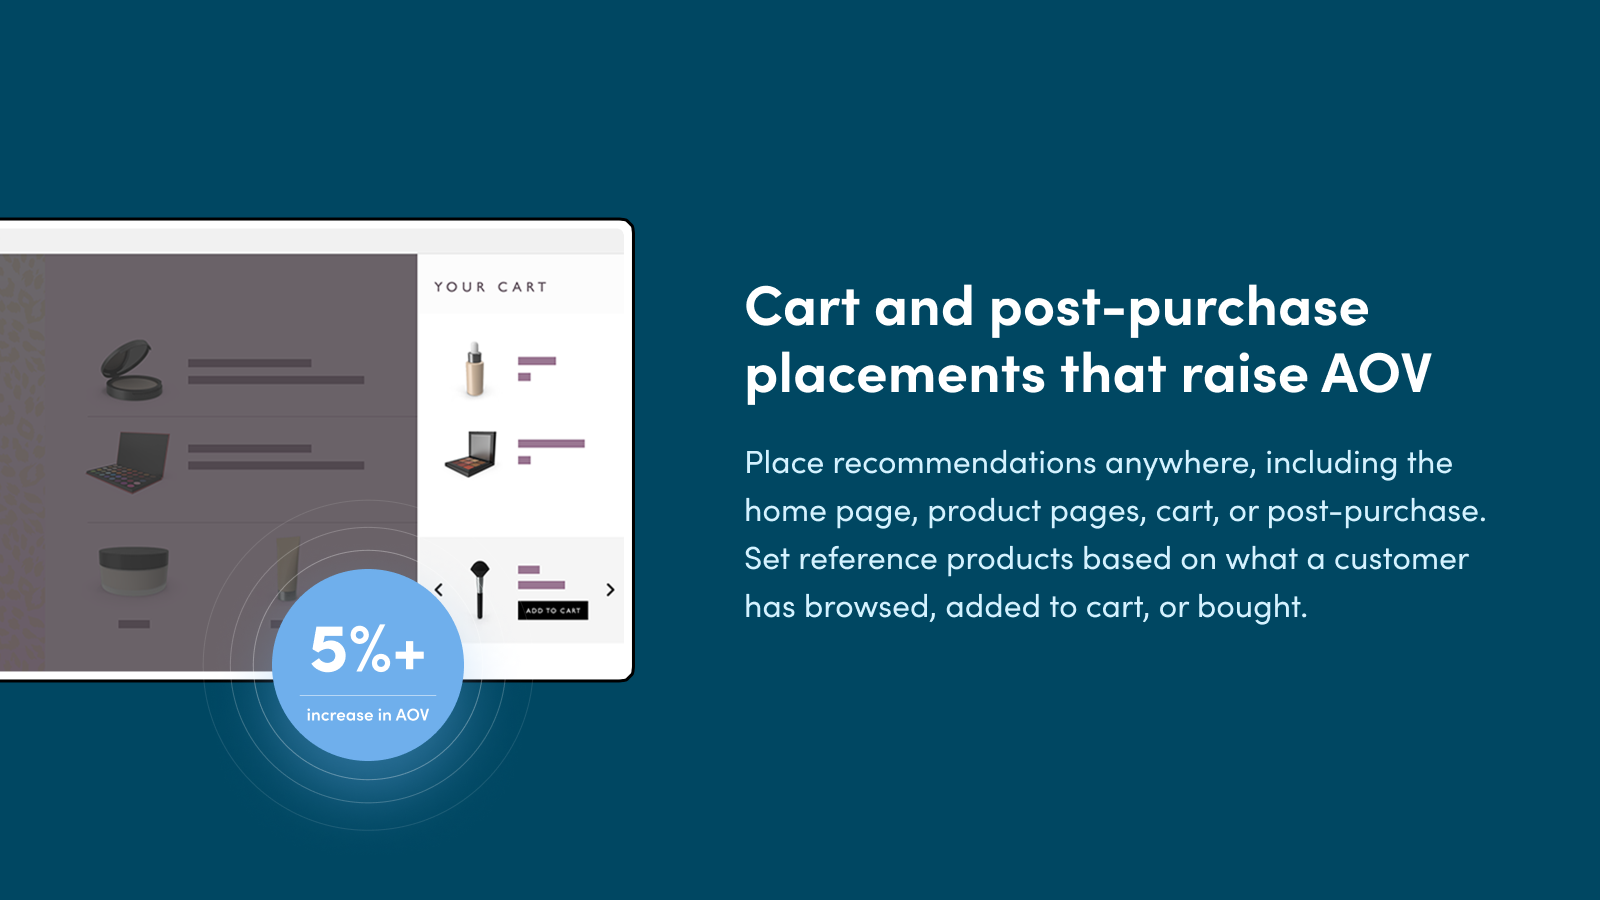 Cart & post-purchase placements increase sales, order value AOV